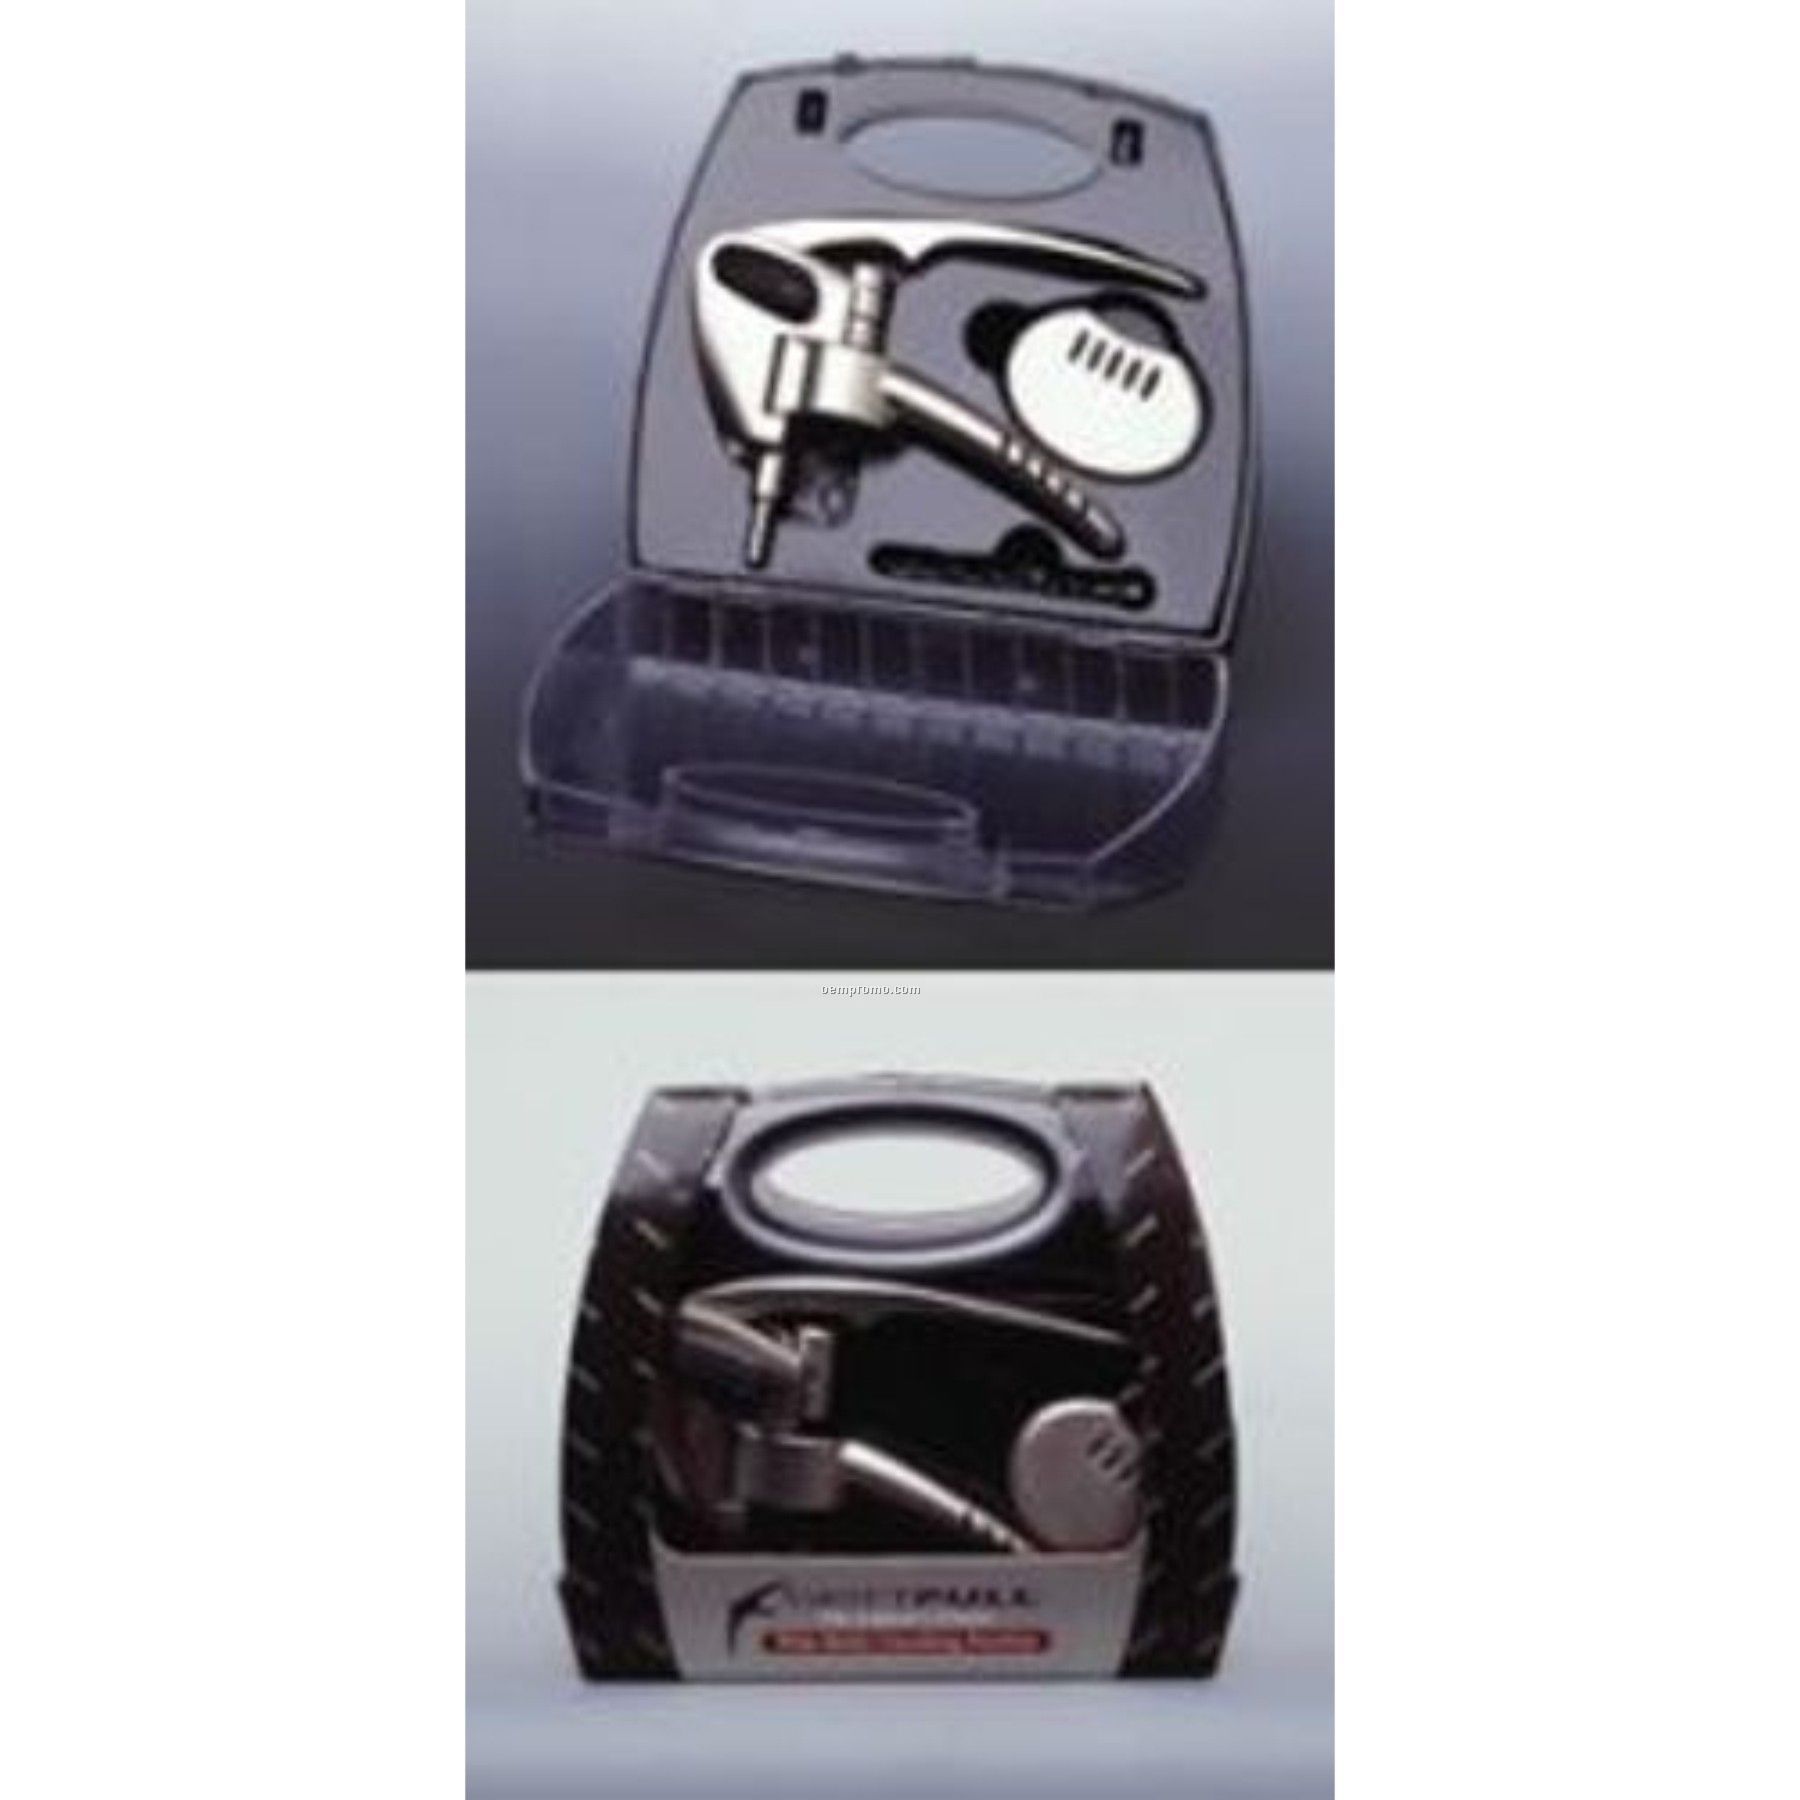 Swiftpull Pro Uncorking Machine Standard Pack With Carry Case